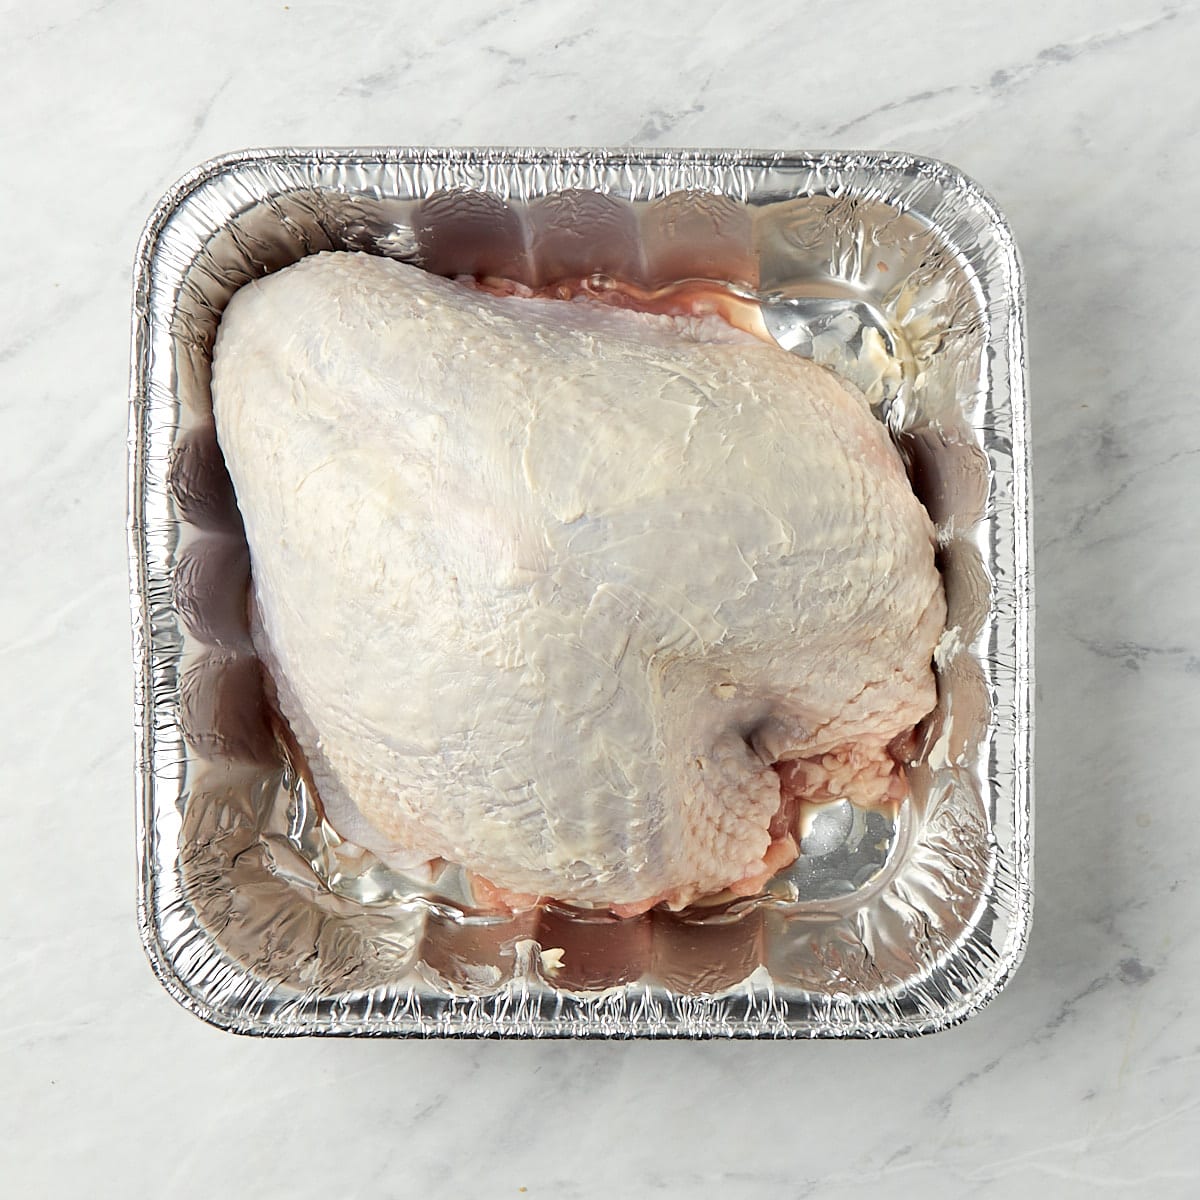 raw turkey breast in an aluminum pan after butter has been rubbed on the skin.